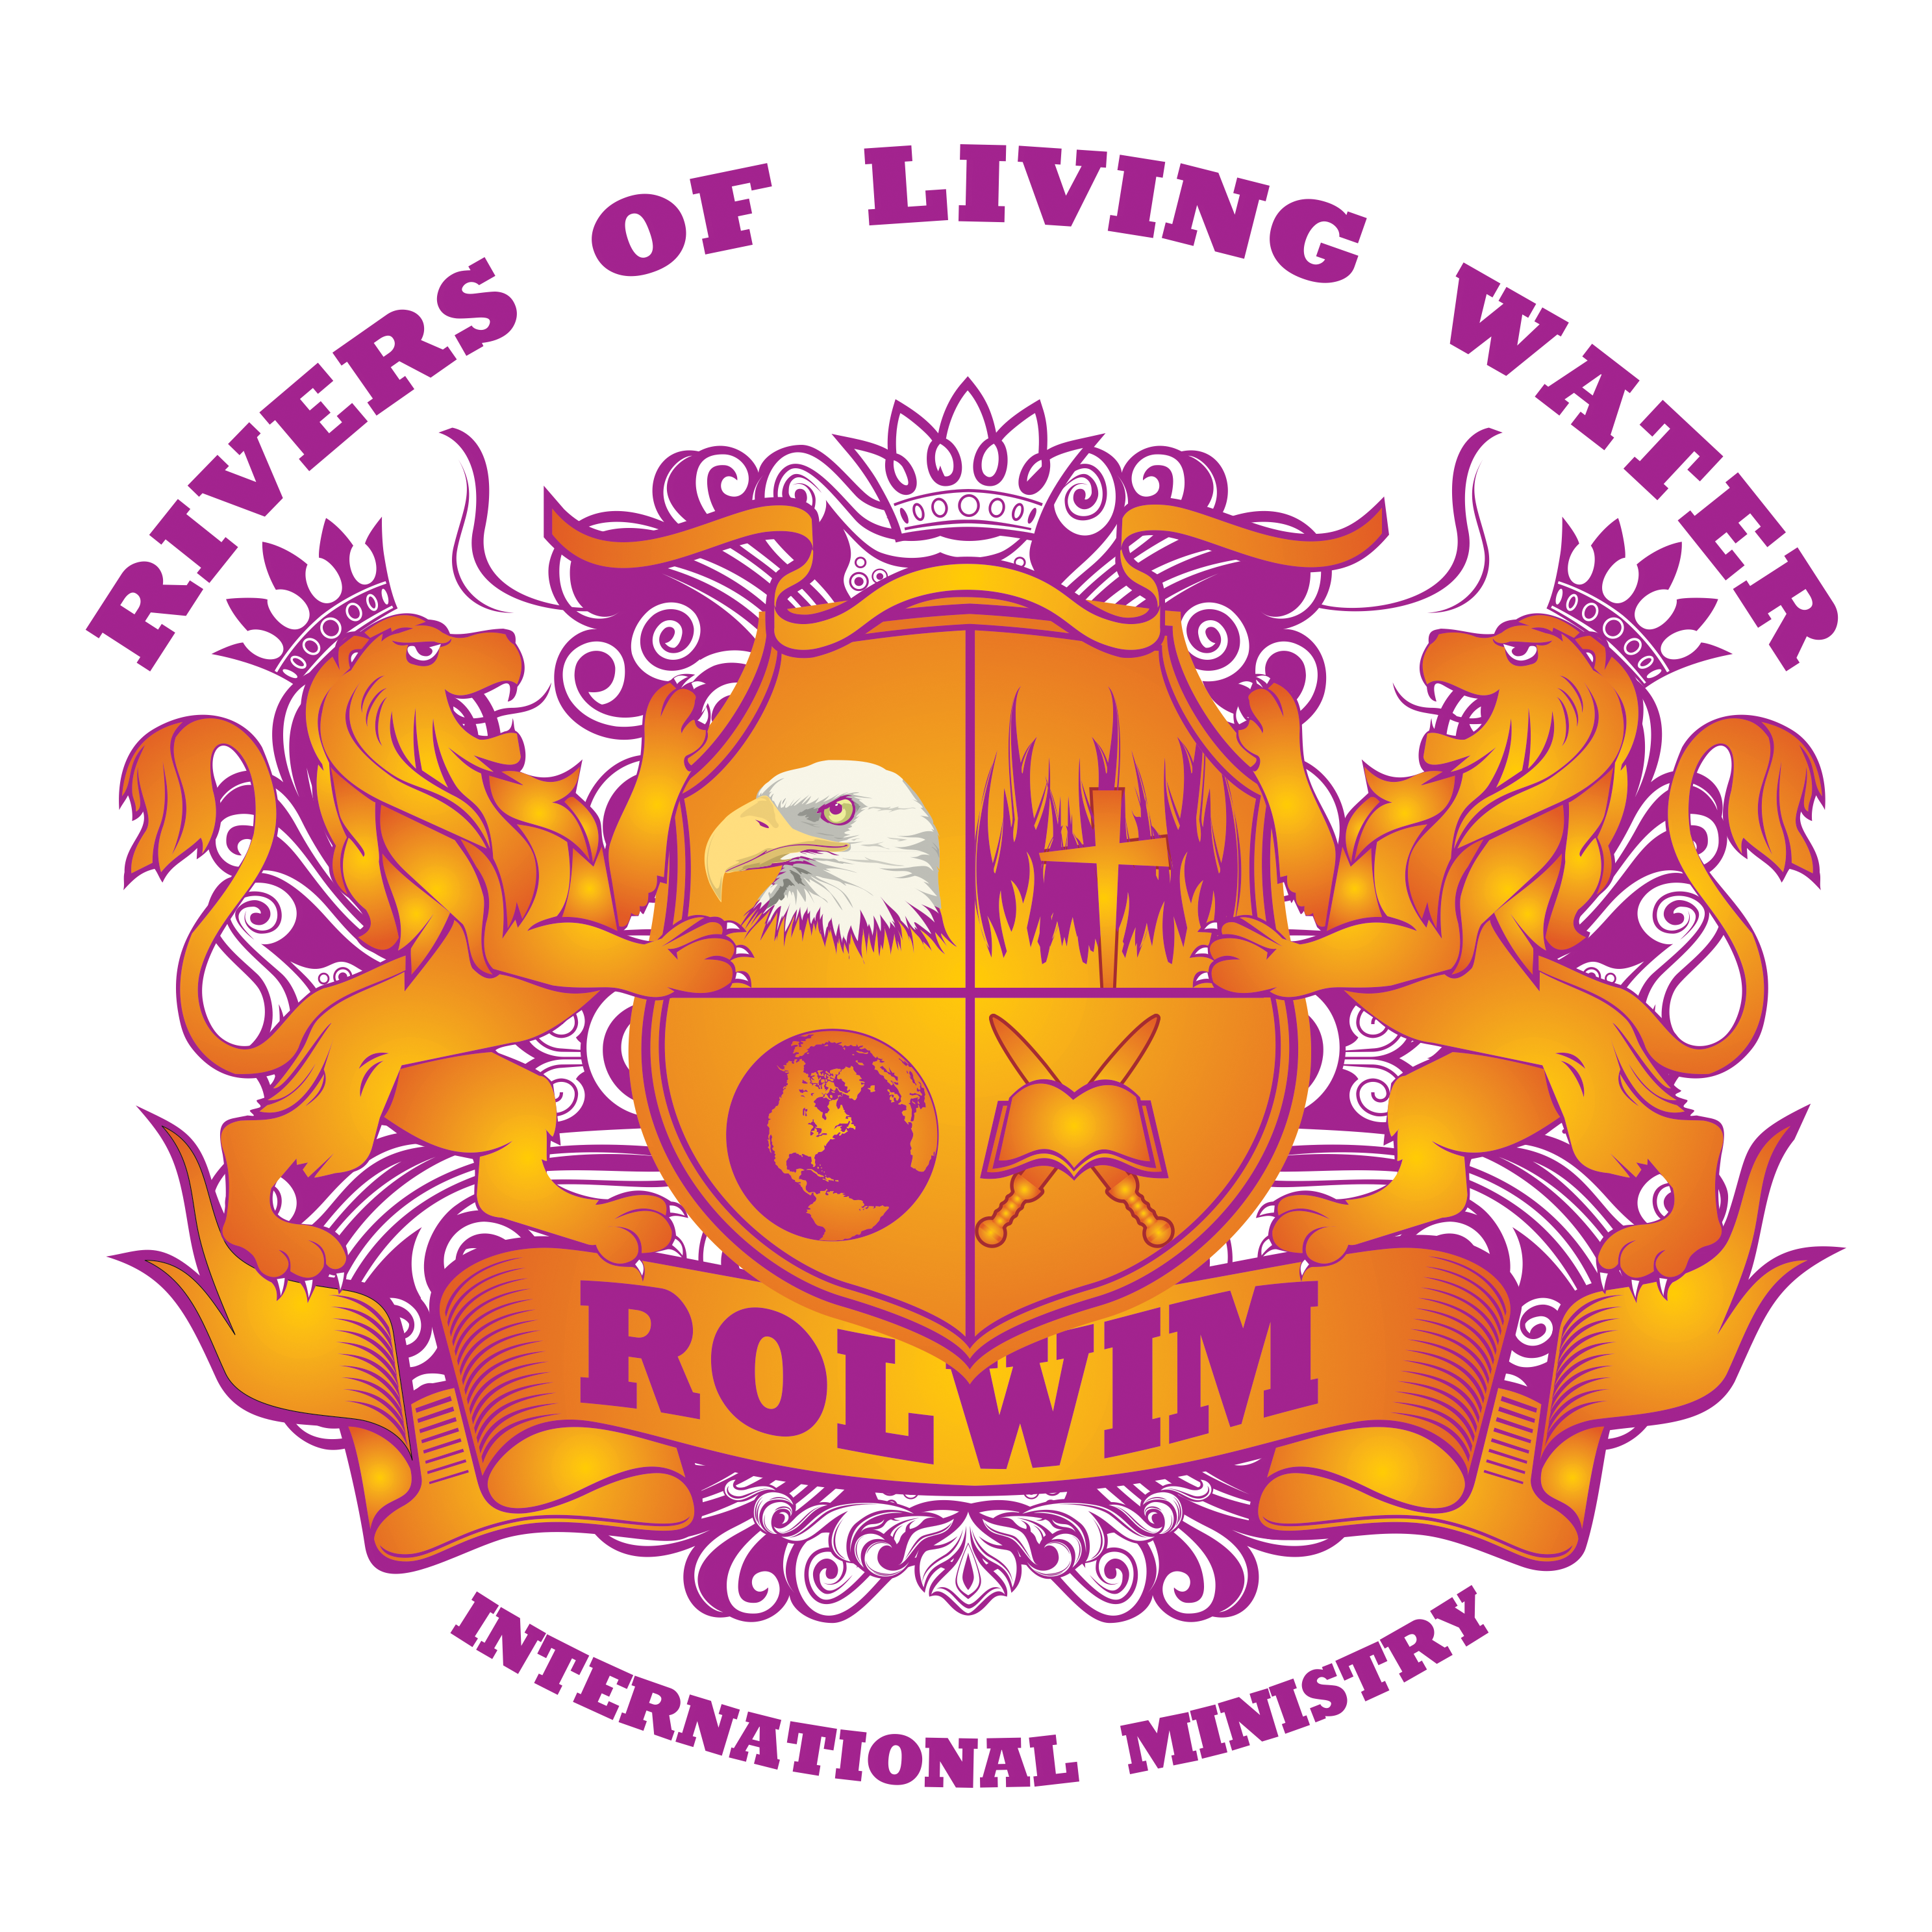 Rivers of Living Water International Ministry — Rolwim